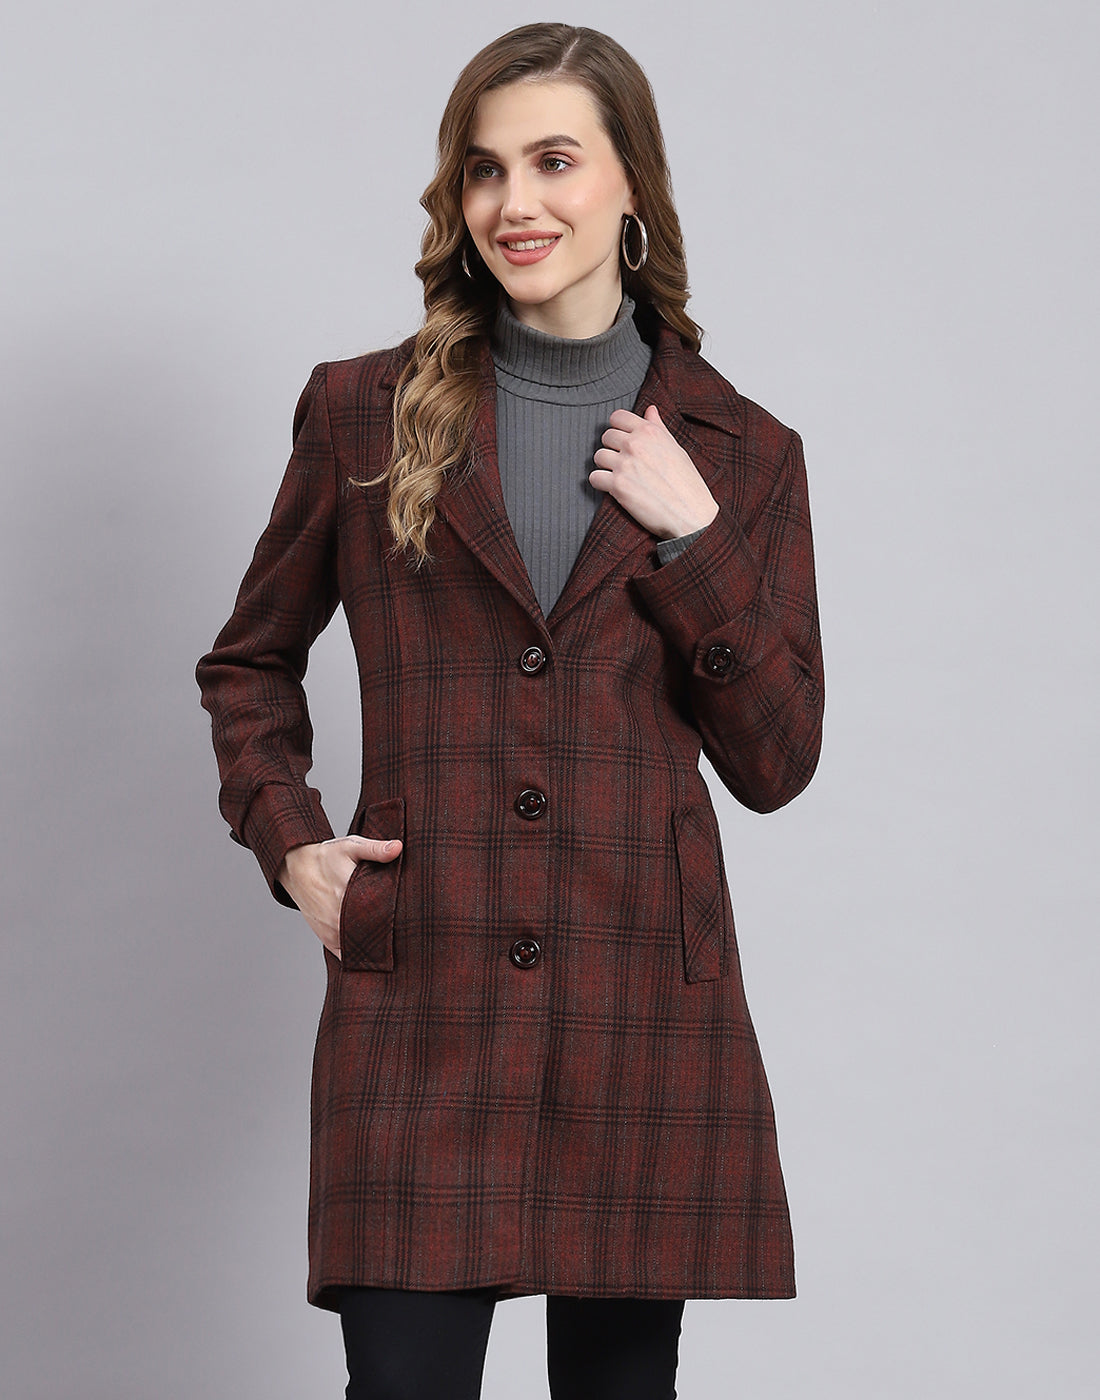 Buy iYYVV Womens Winter Lapel Wool Coat Trench Jacket Long Sleeve Overcoat  Long Outwear Gray at Amazon.in